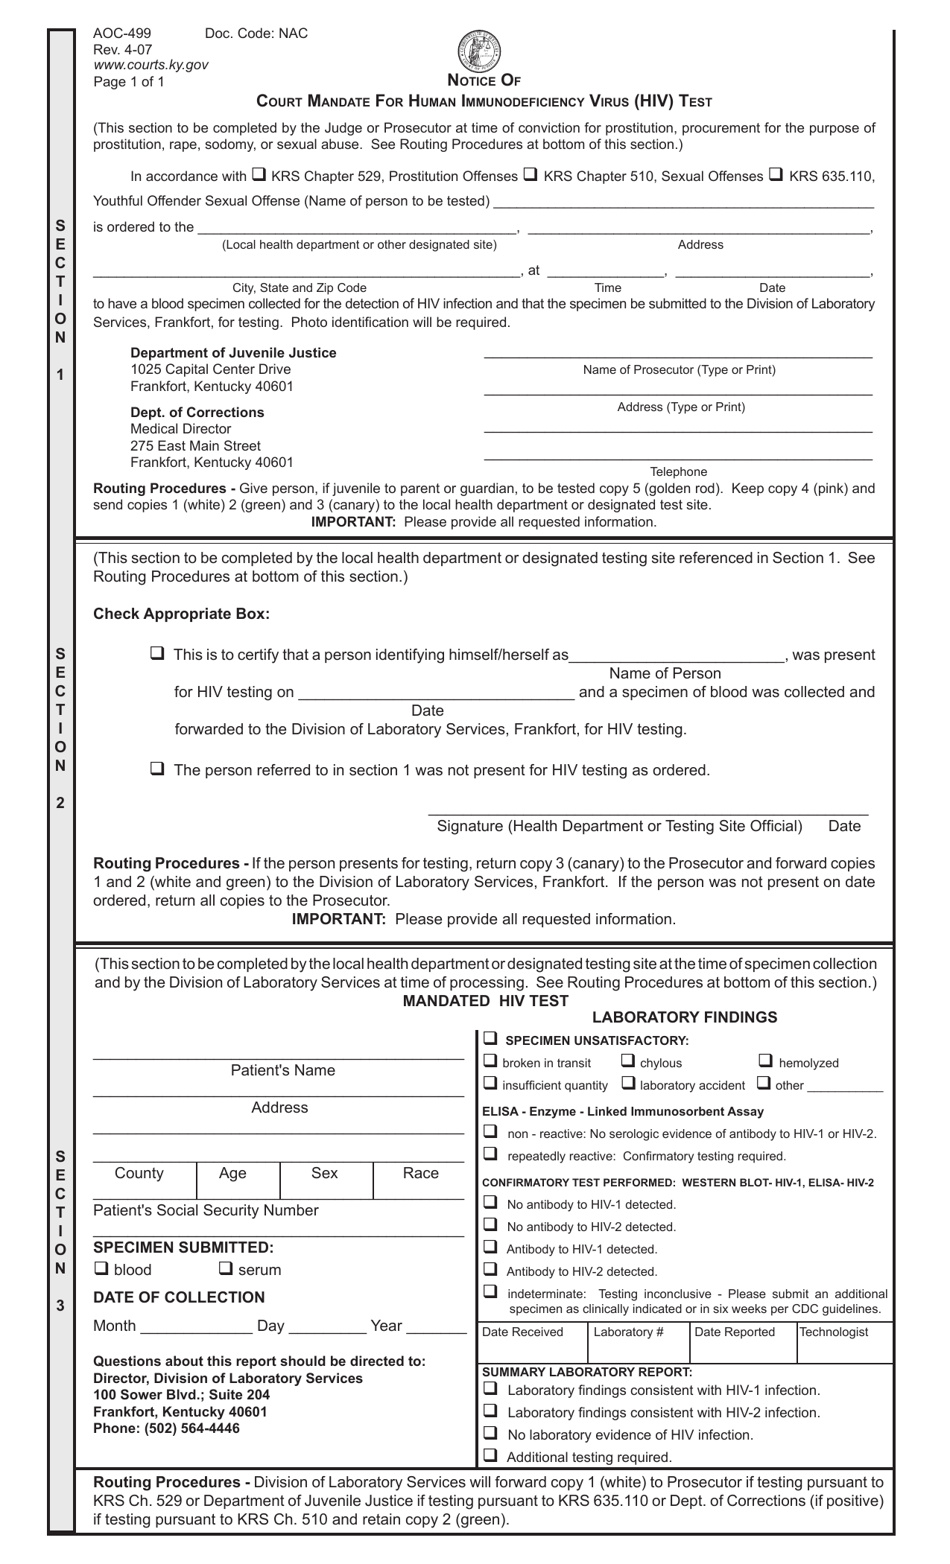 Form AOC-499 Notice of Court Mandate for Human Immunodeficiency Virus (HIV) Test - Kentucky, Page 1